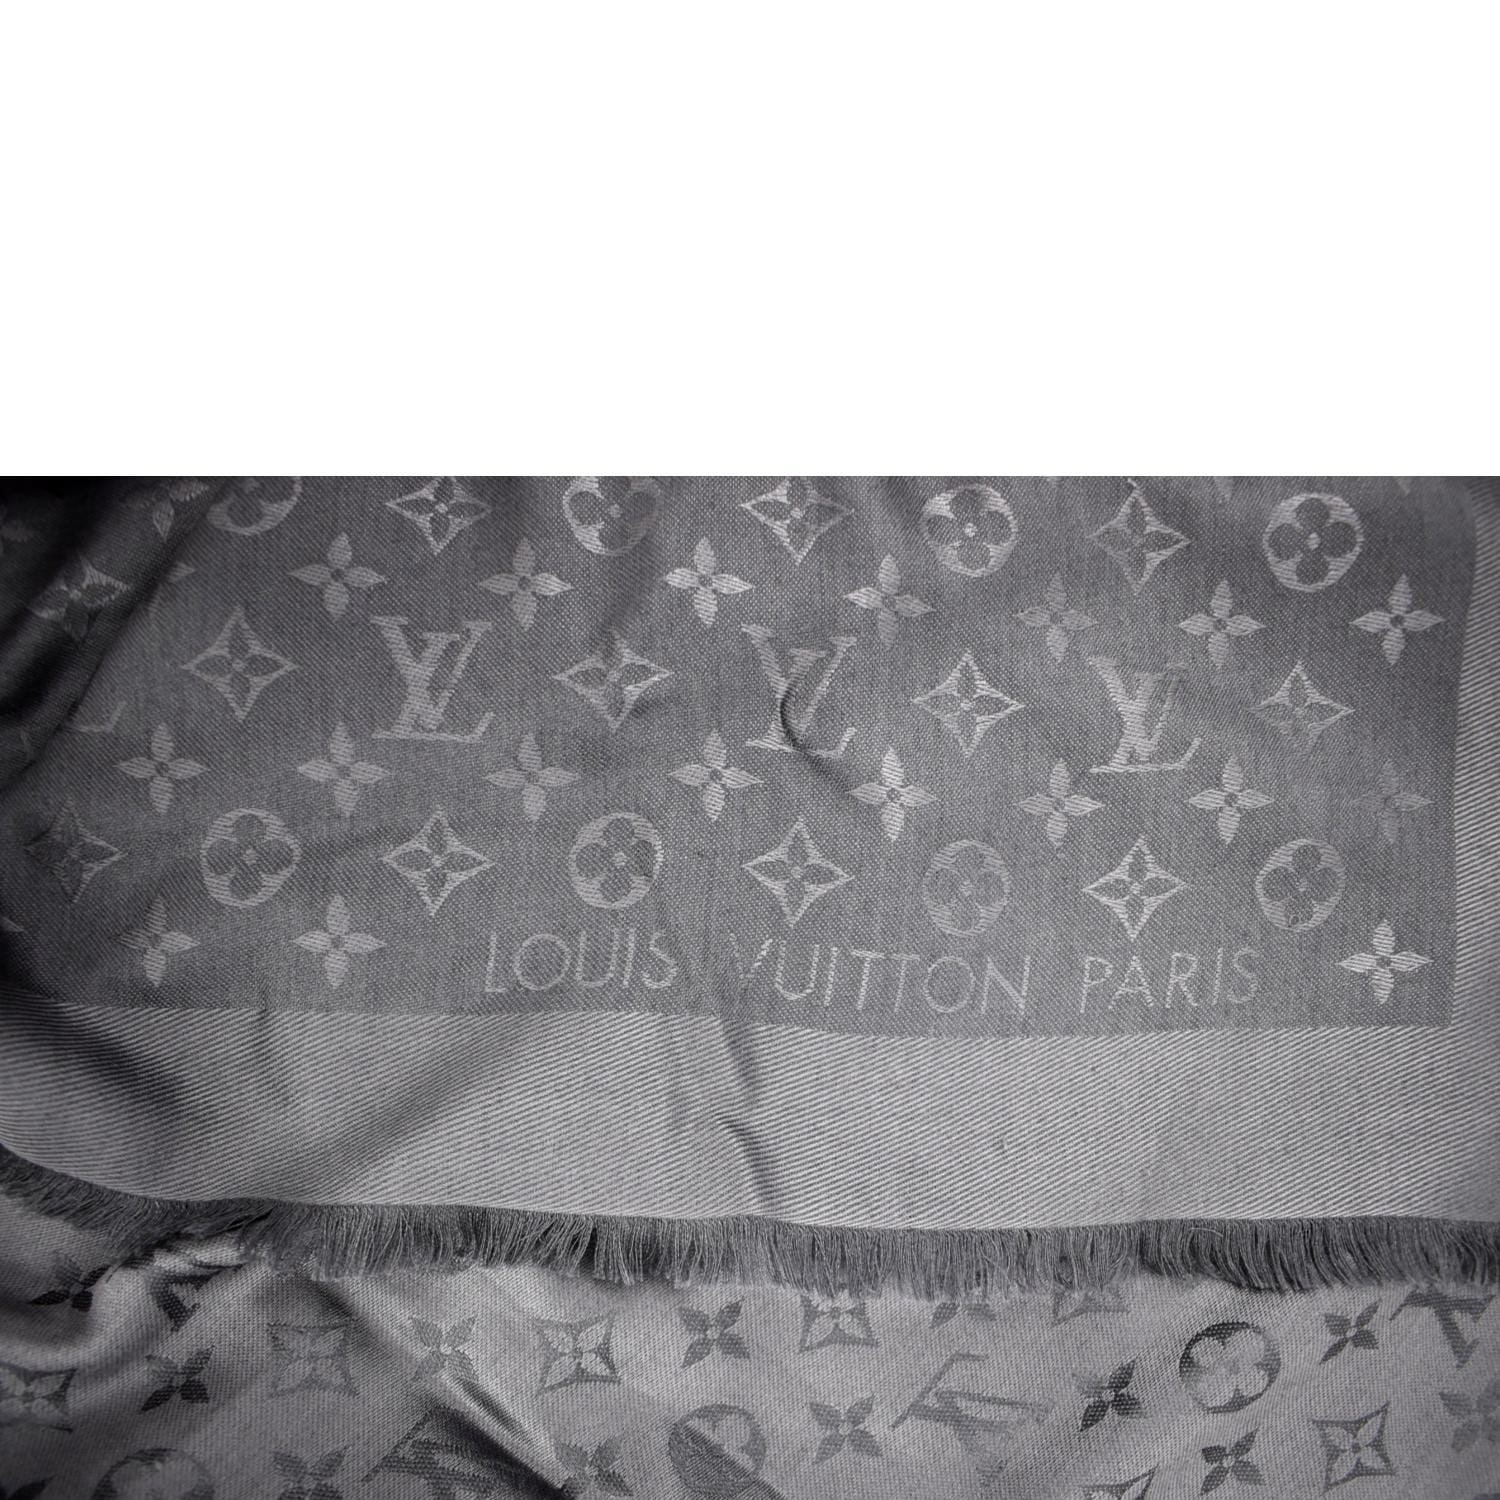 How to Wear Black Louis Vuitton Scarf - Search for Black Louis Vuitton Scarf